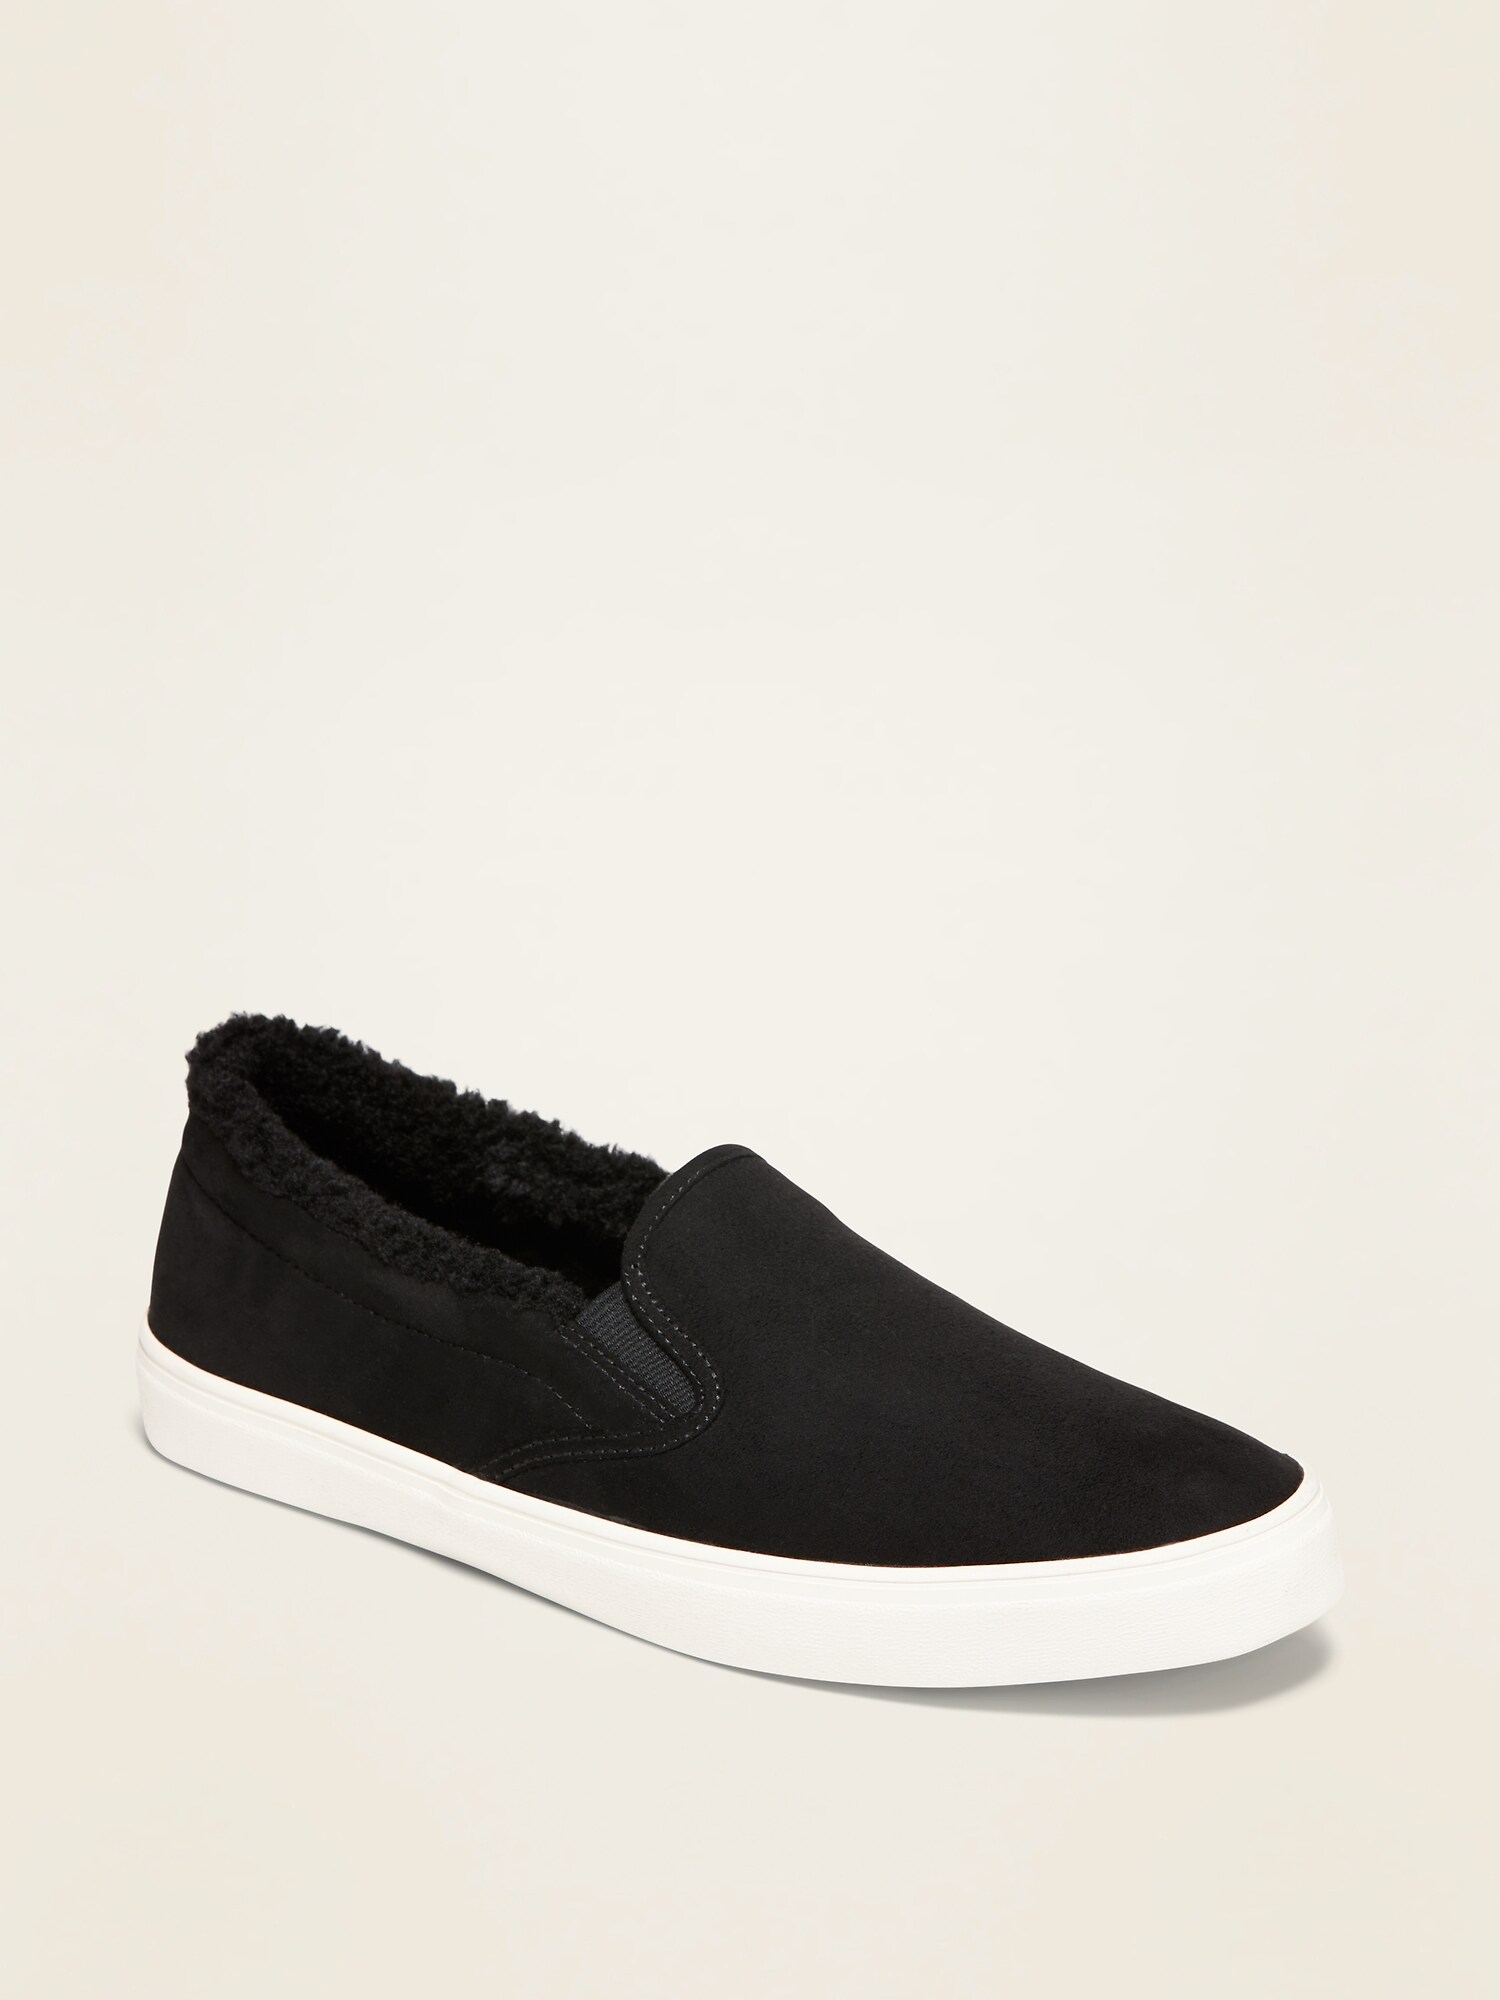 sherpa lined slip on shoes